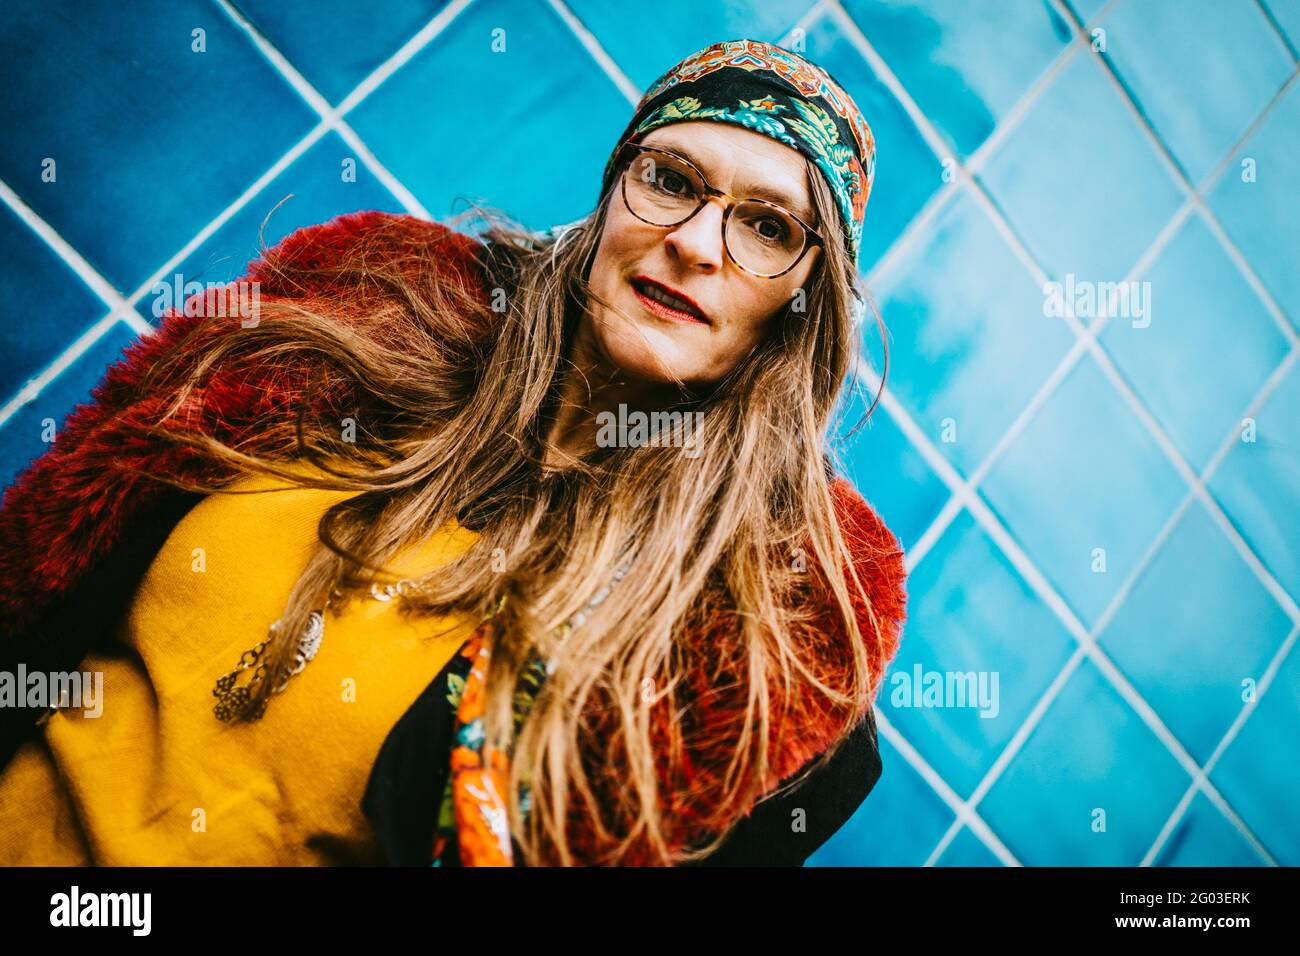 Portrait of mature woman wearing headscarf against blue tiled wall Stock Photo